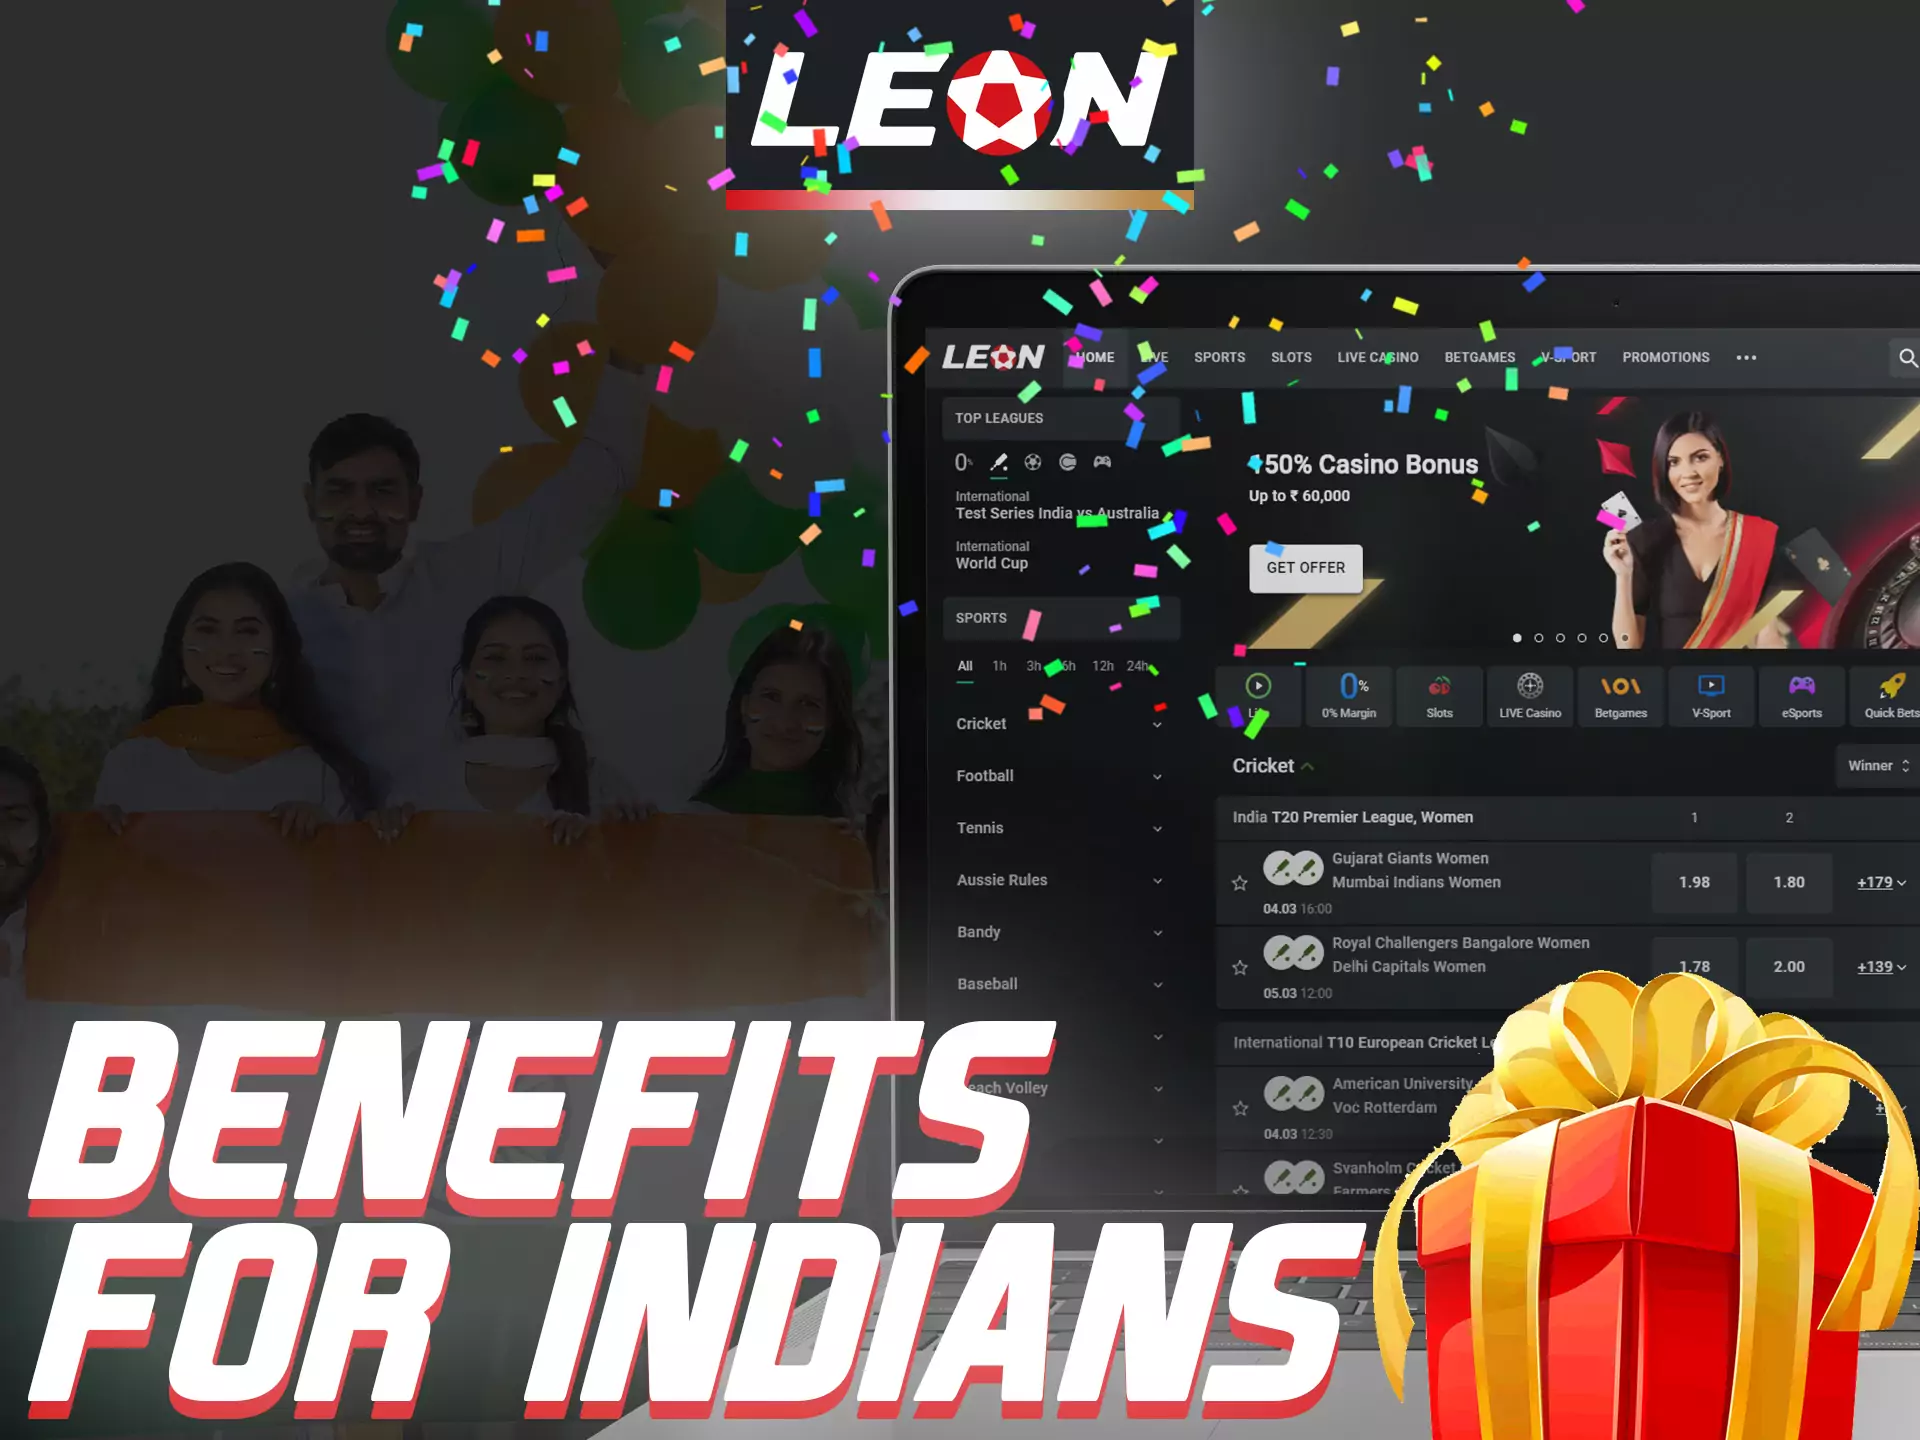 Leonbet offers many bonuses and benefits to its Indian players.